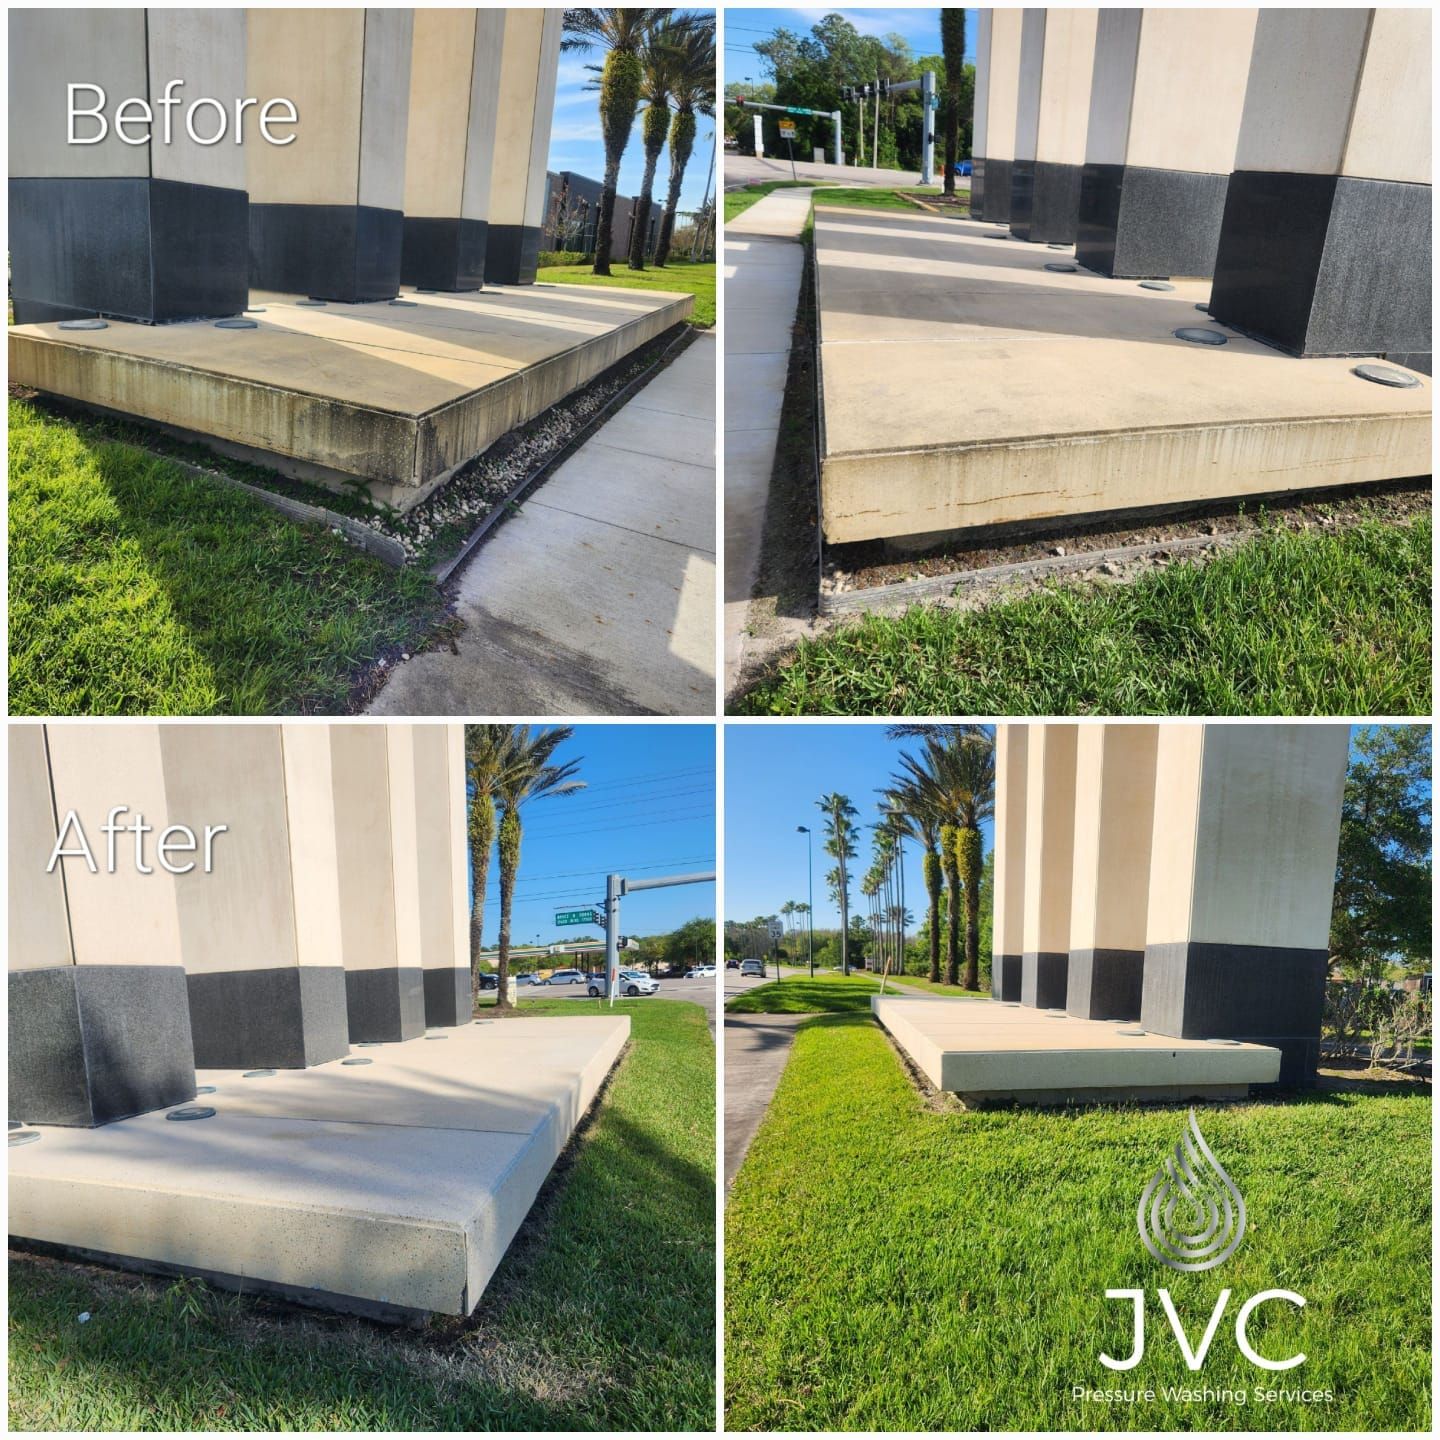 Pressure Washing for JVC Pressure Washing Services in Tampa, FL